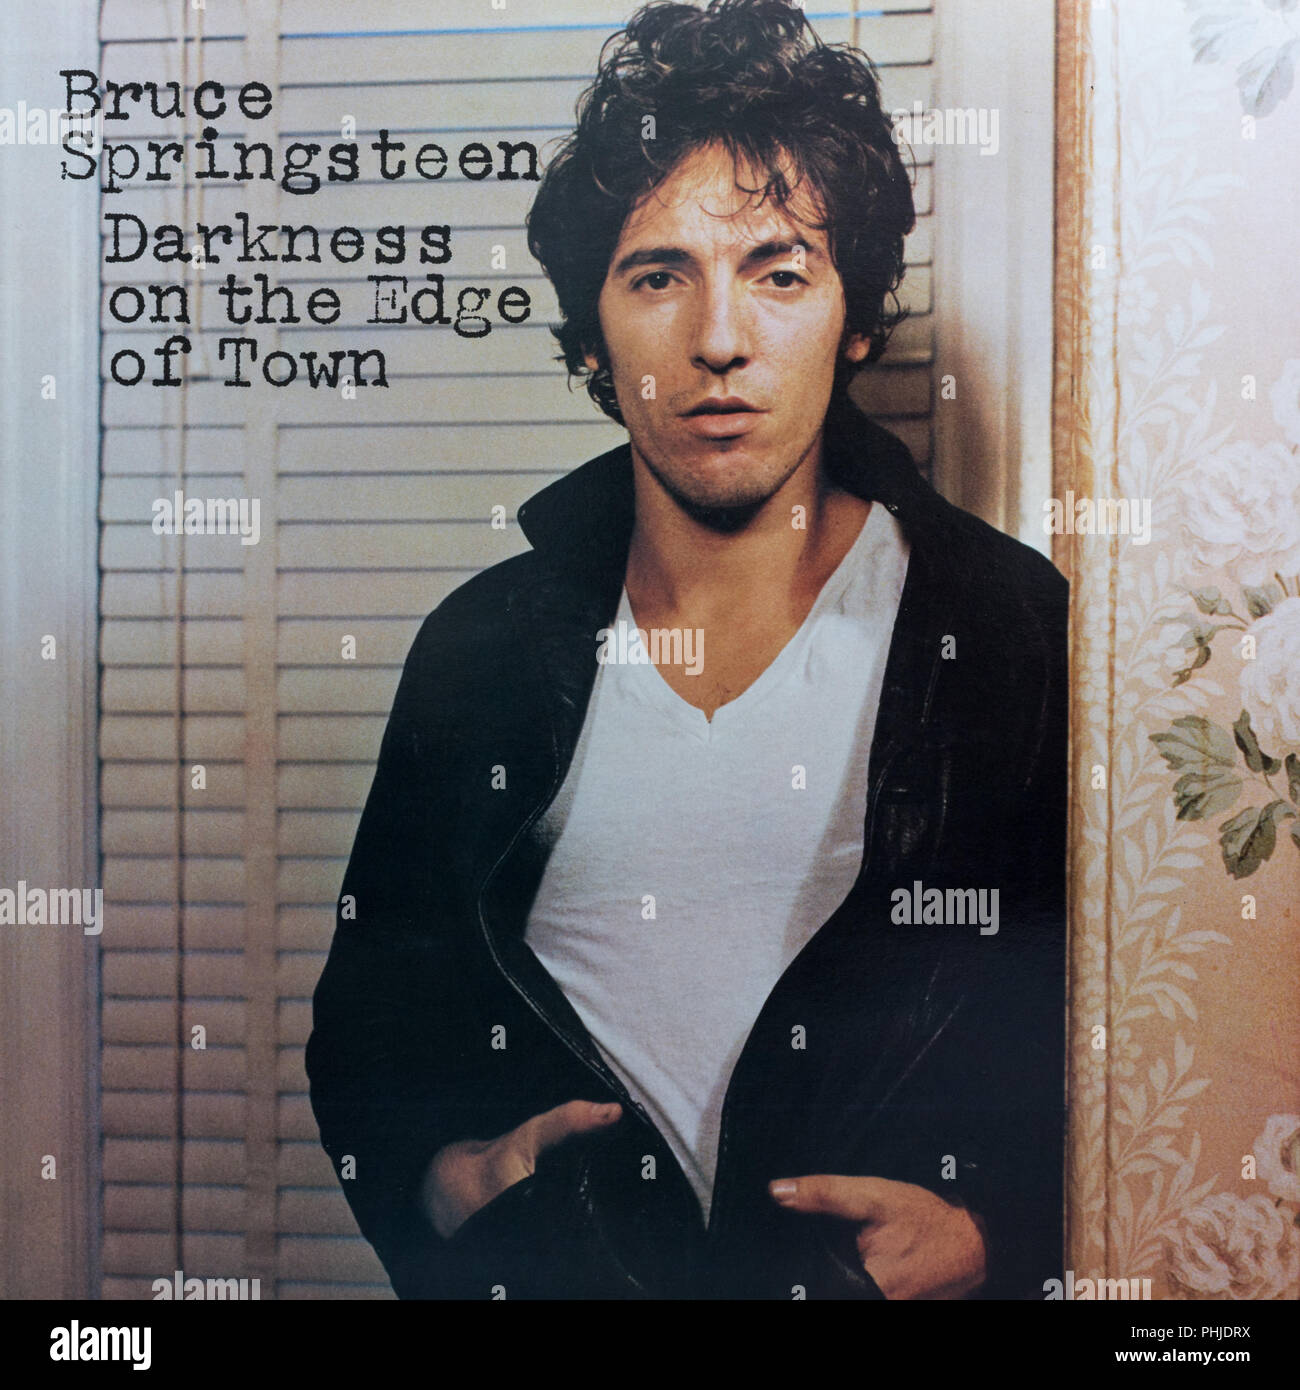 Bruce Springsteen Darkness on the Edge of Town album cover Stock Photo